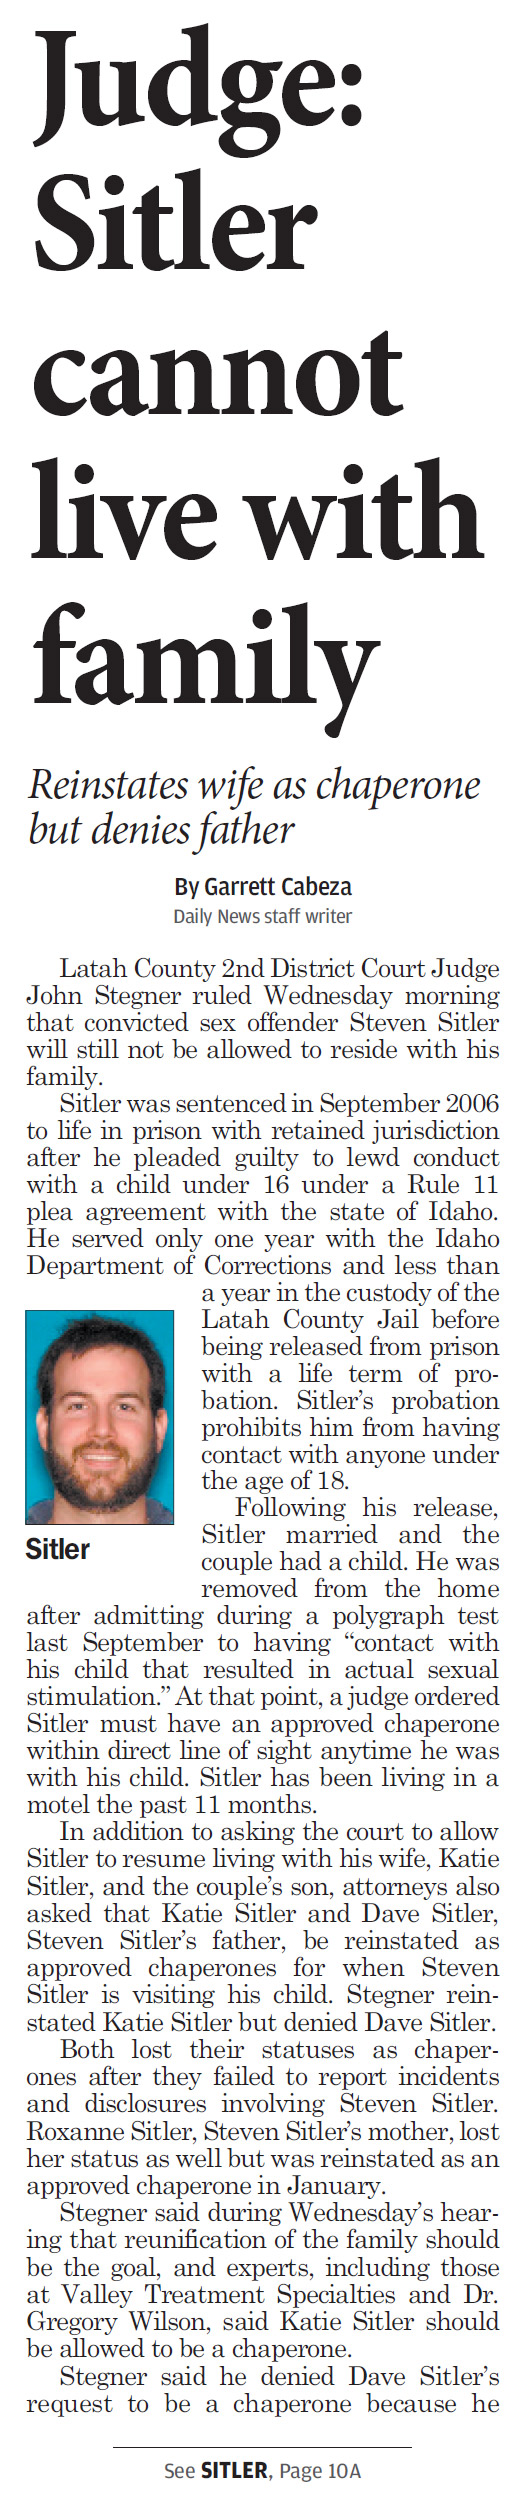 Moscow-Pullman Daily News: Judge: Sitler cannot live with family Reinstates wife as chaperone but denies father, page 1